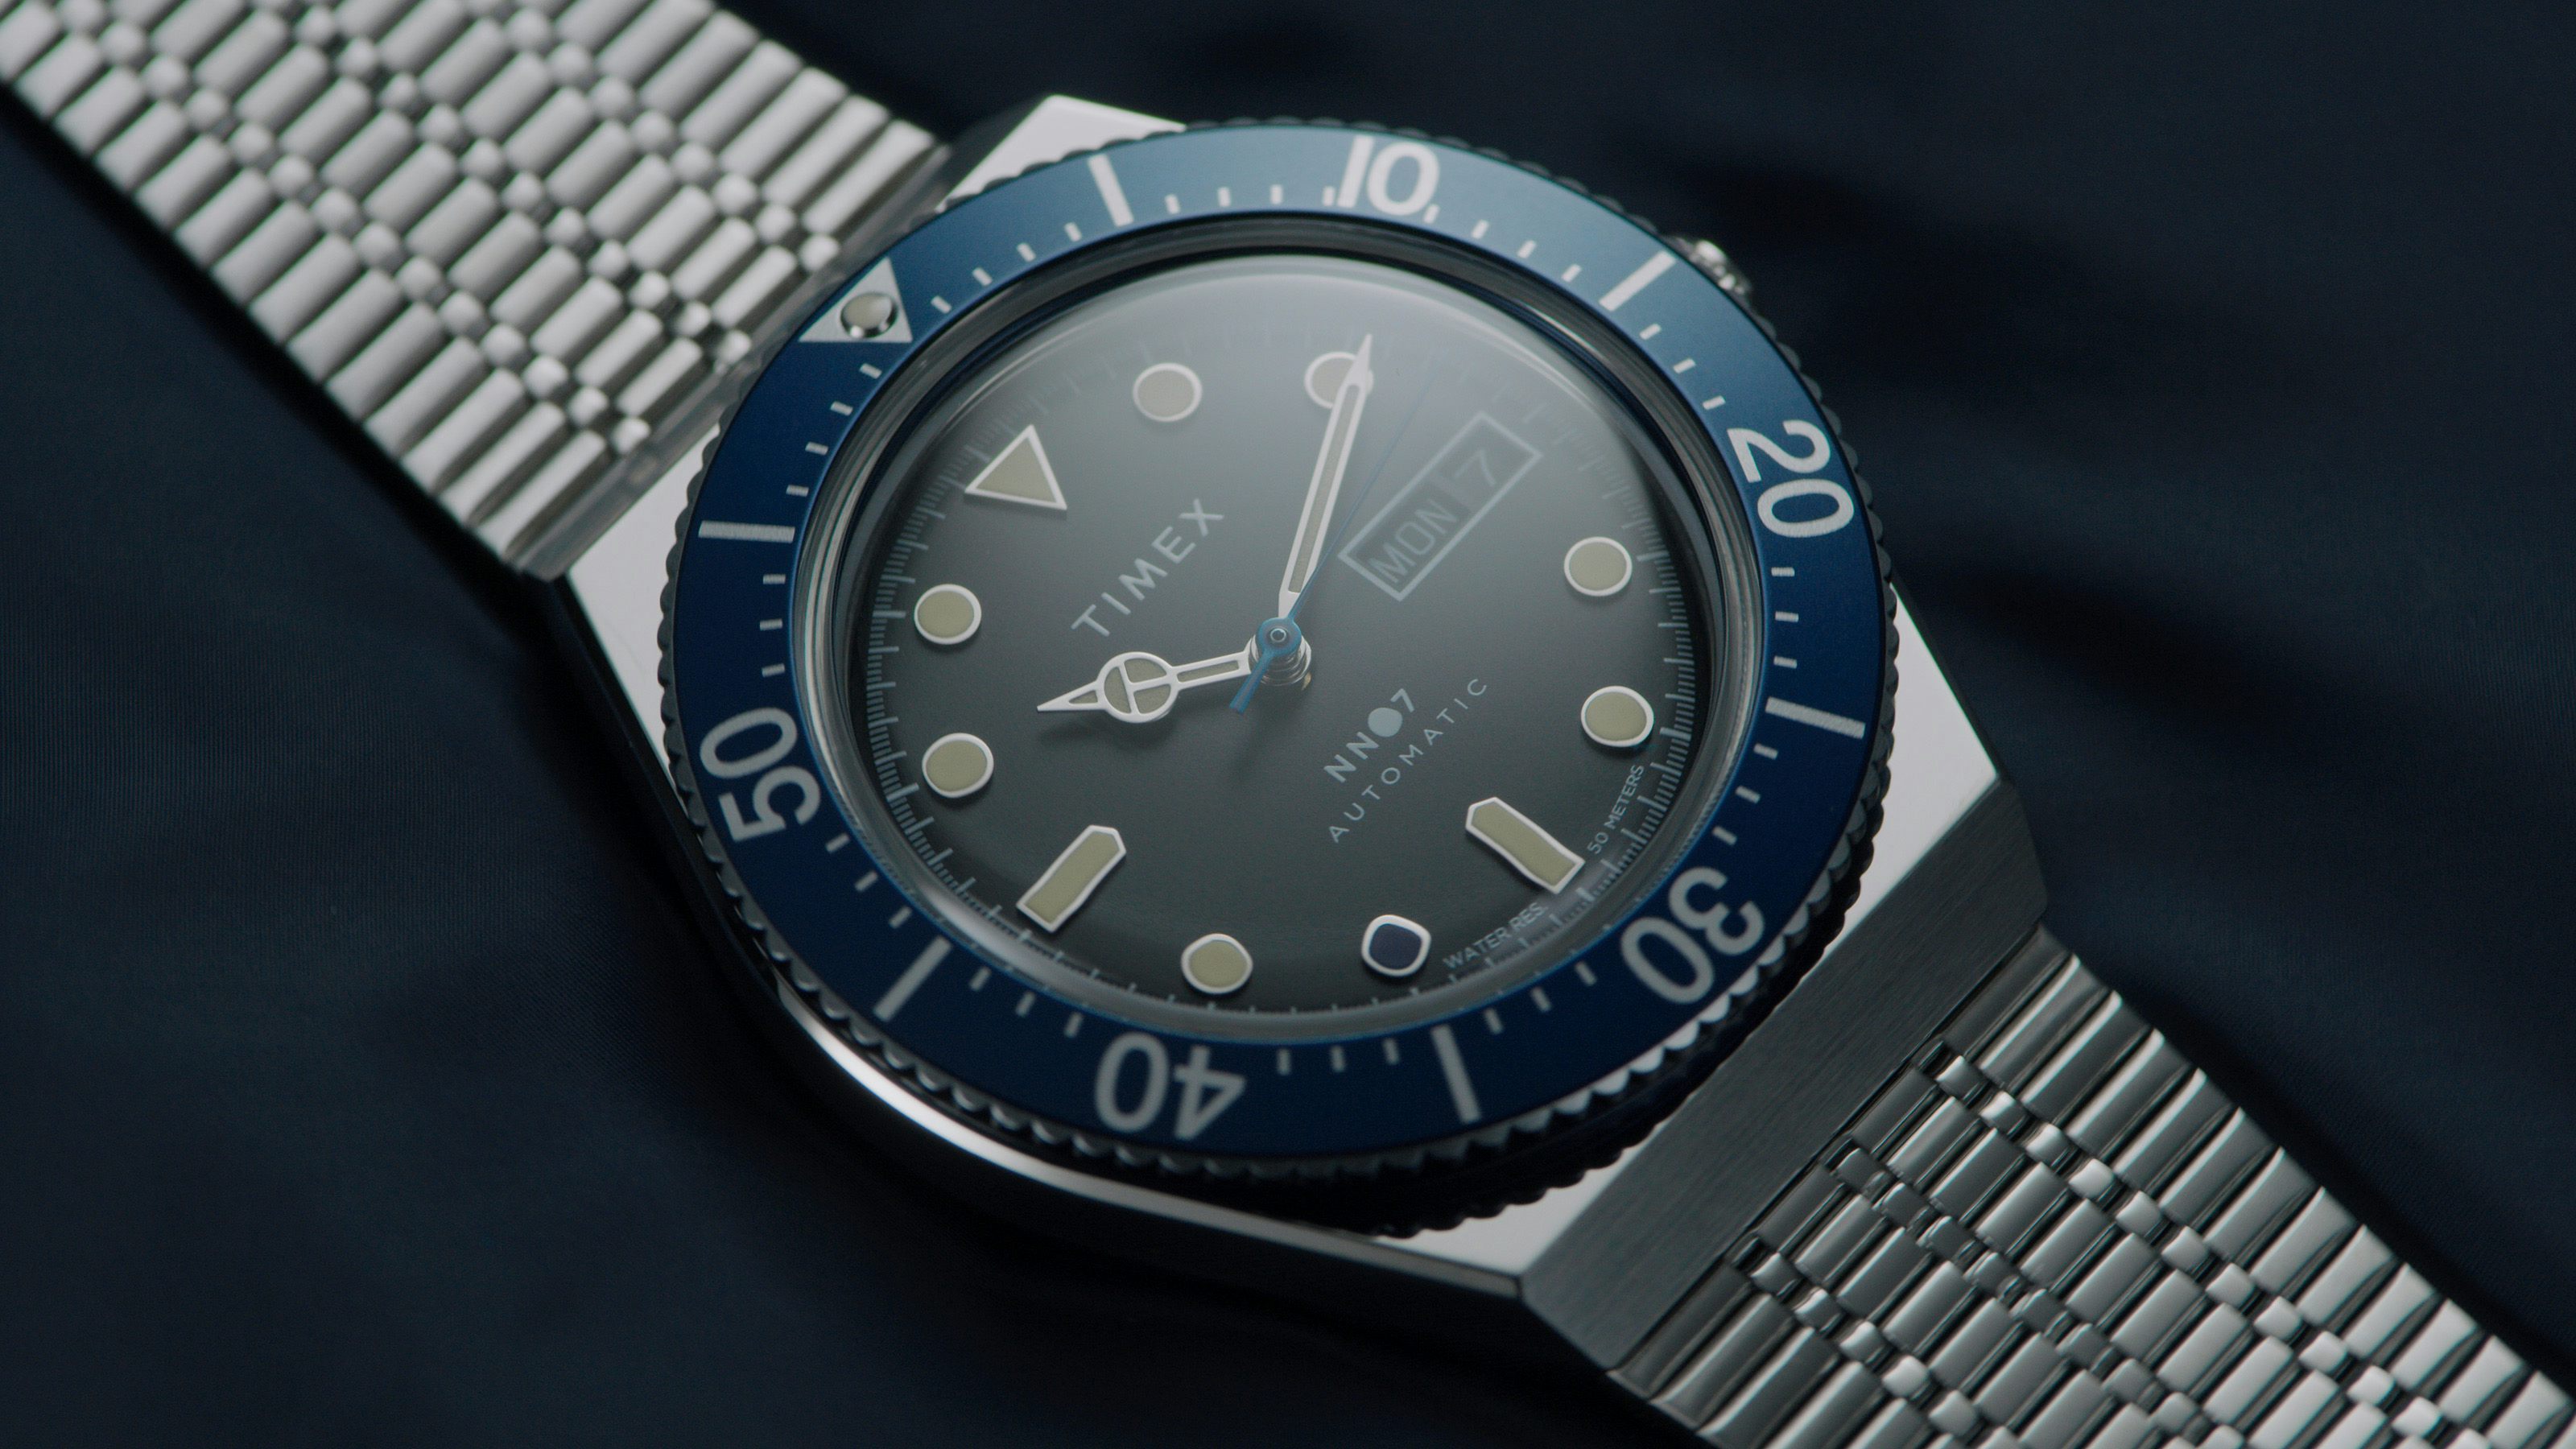 Introducing: The Timex x NN07 M79 Limited Edition - HODINKEE